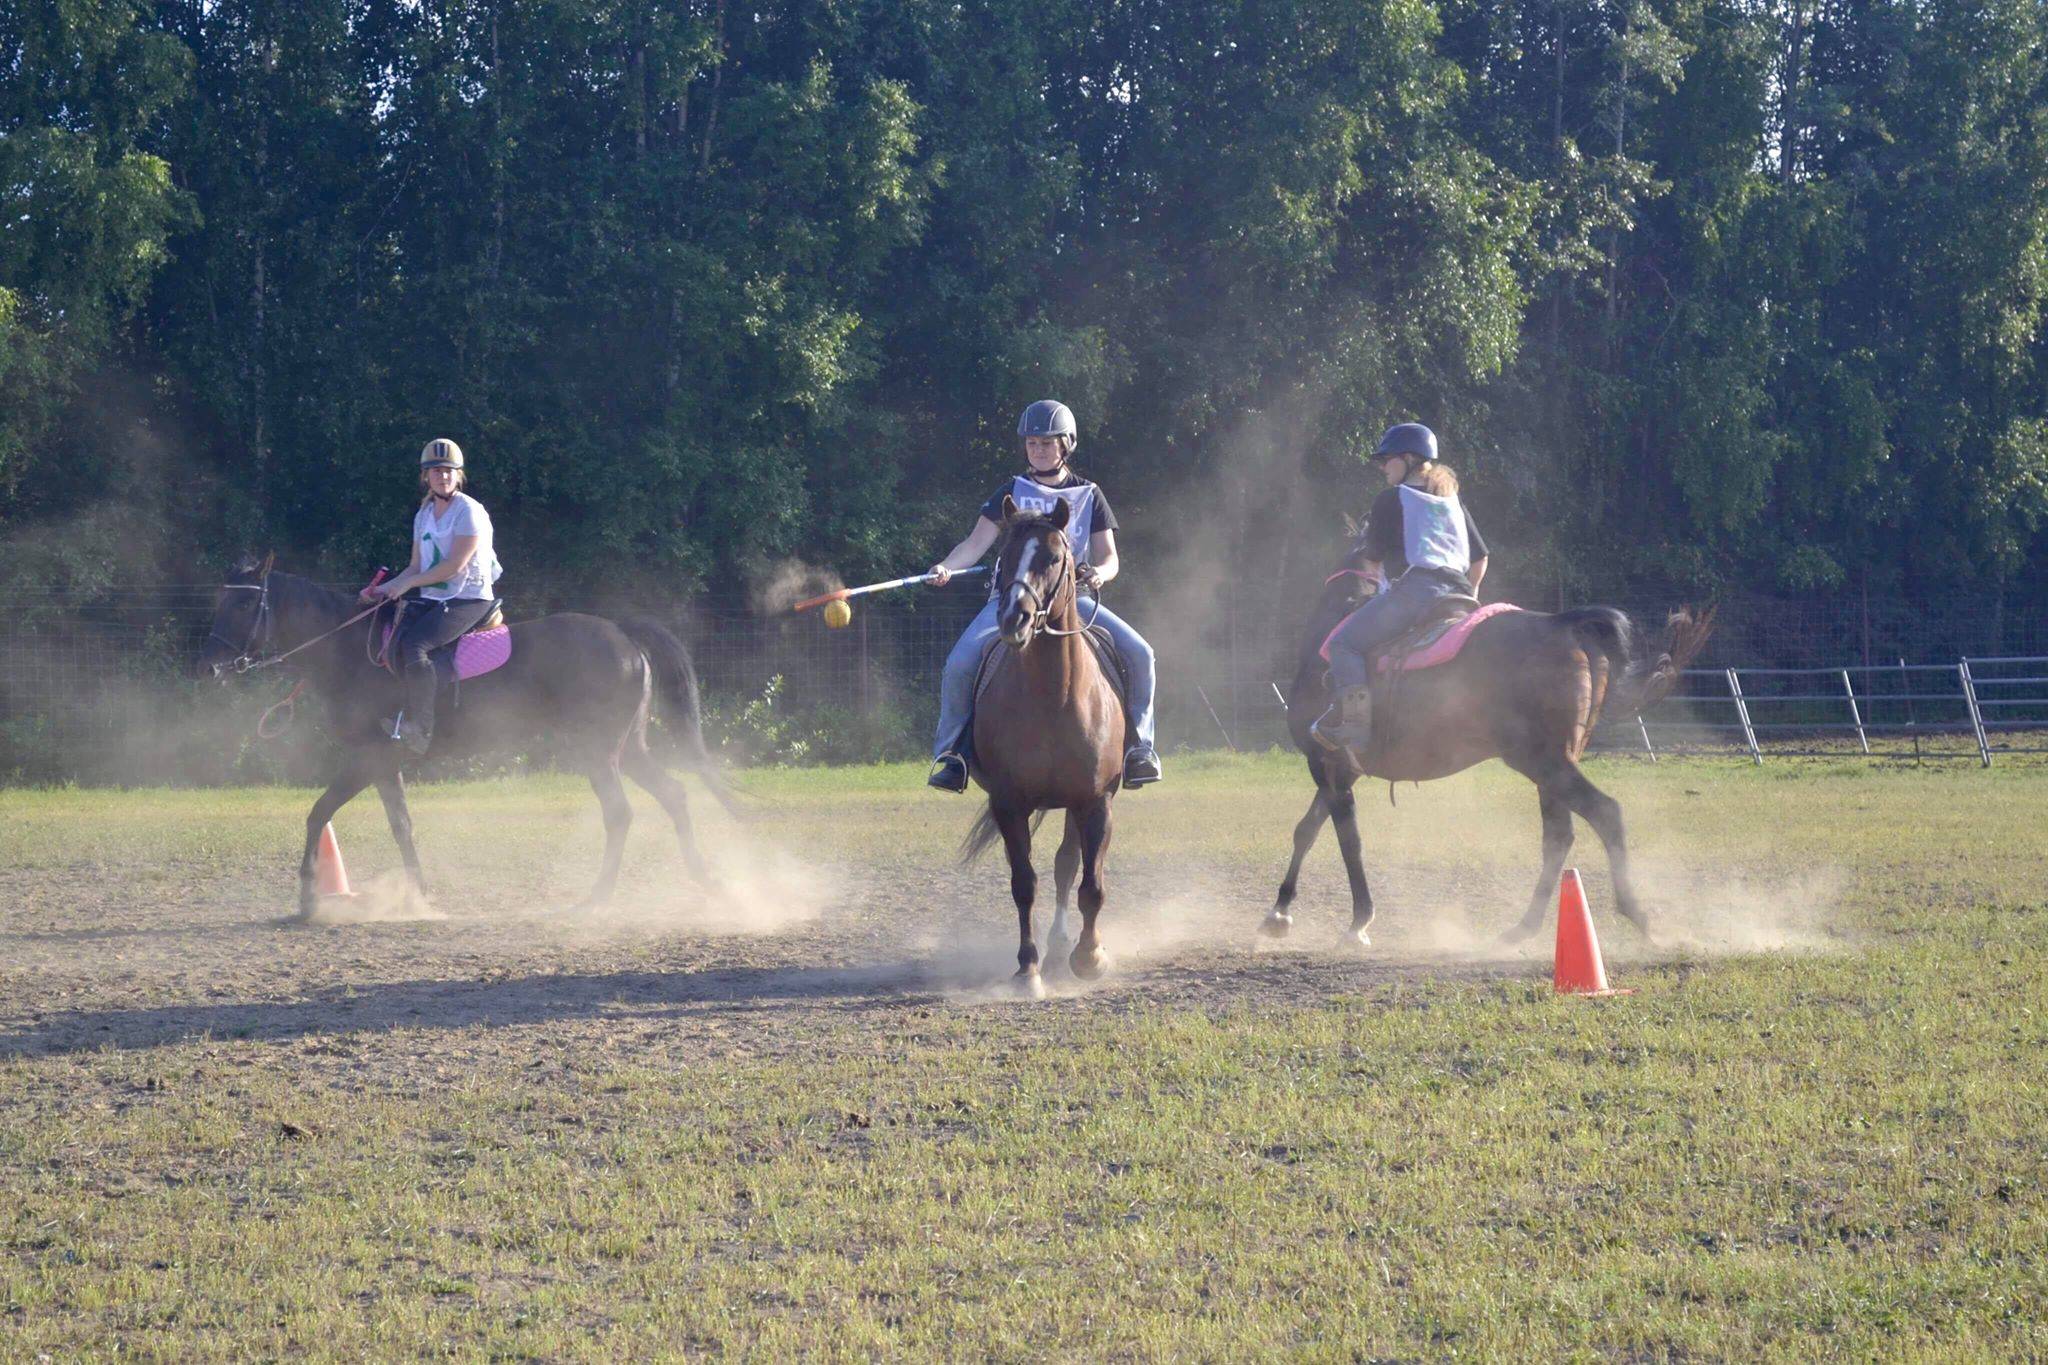 A group of riders engage in a game of polocrosse, a sport combining rules of polo and lacrosse, Thursday, July, 25, 2019 near Soldotna, Alaska. (Photo by Victoria Petersen/Peninsula Clarion)